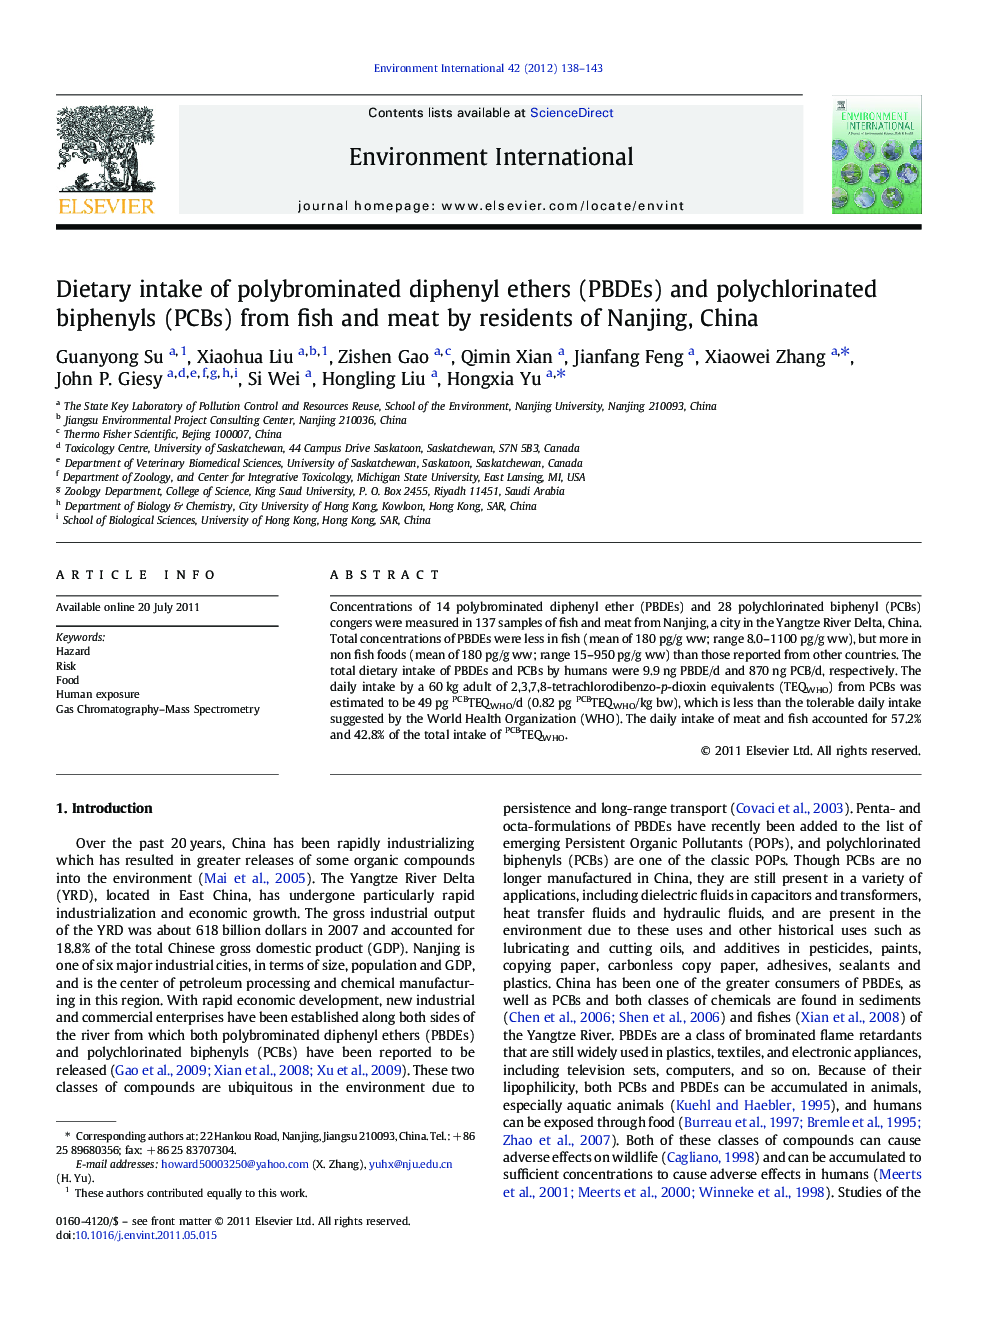 Dietary intake of polybrominated diphenyl ethers (PBDEs) and polychlorinated biphenyls (PCBs) from fish and meat by residents of Nanjing, China